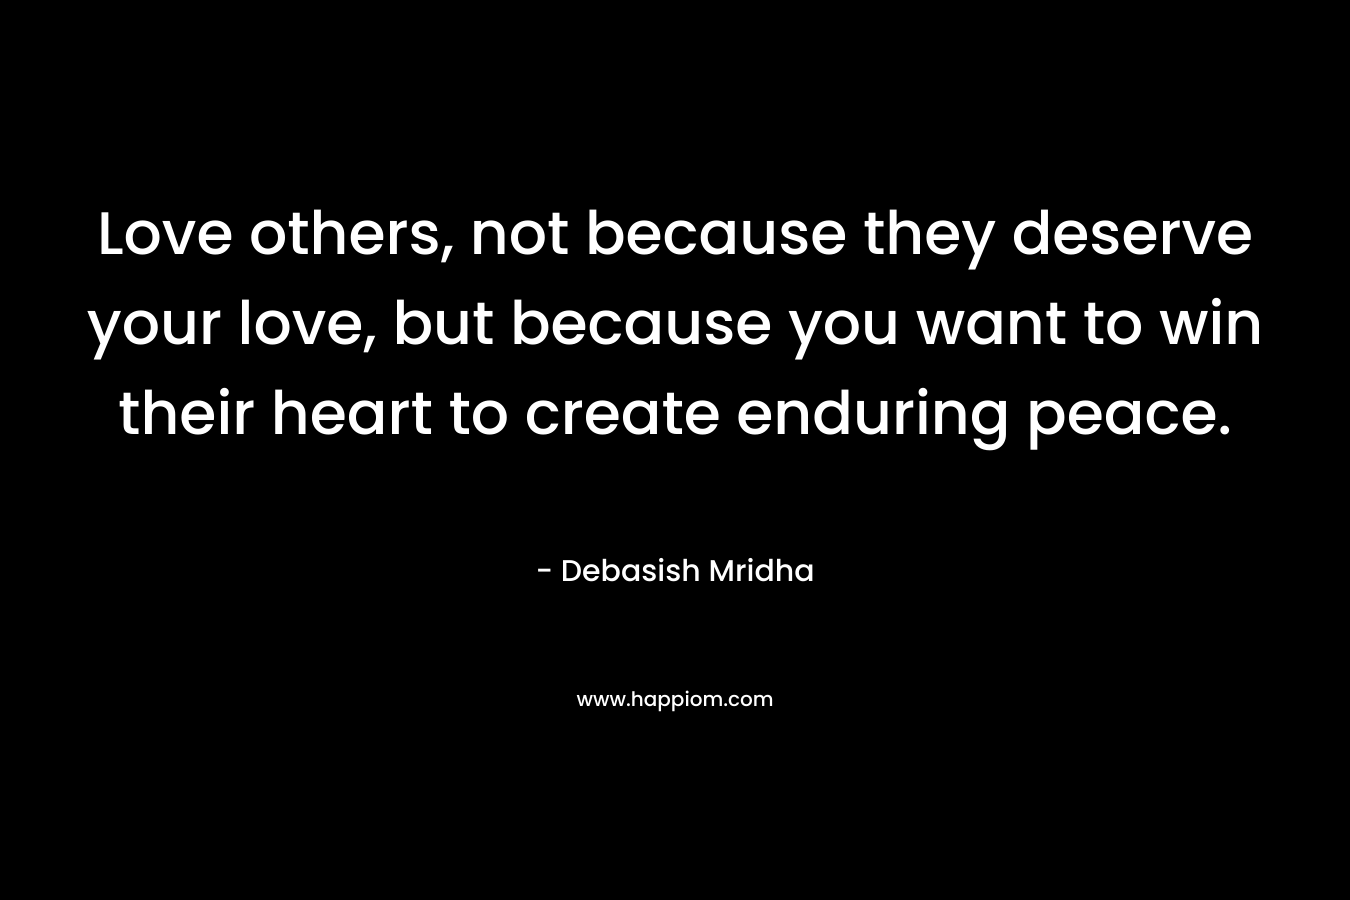 Love others, not because they deserve your love, but because you want to win their heart to create enduring peace.